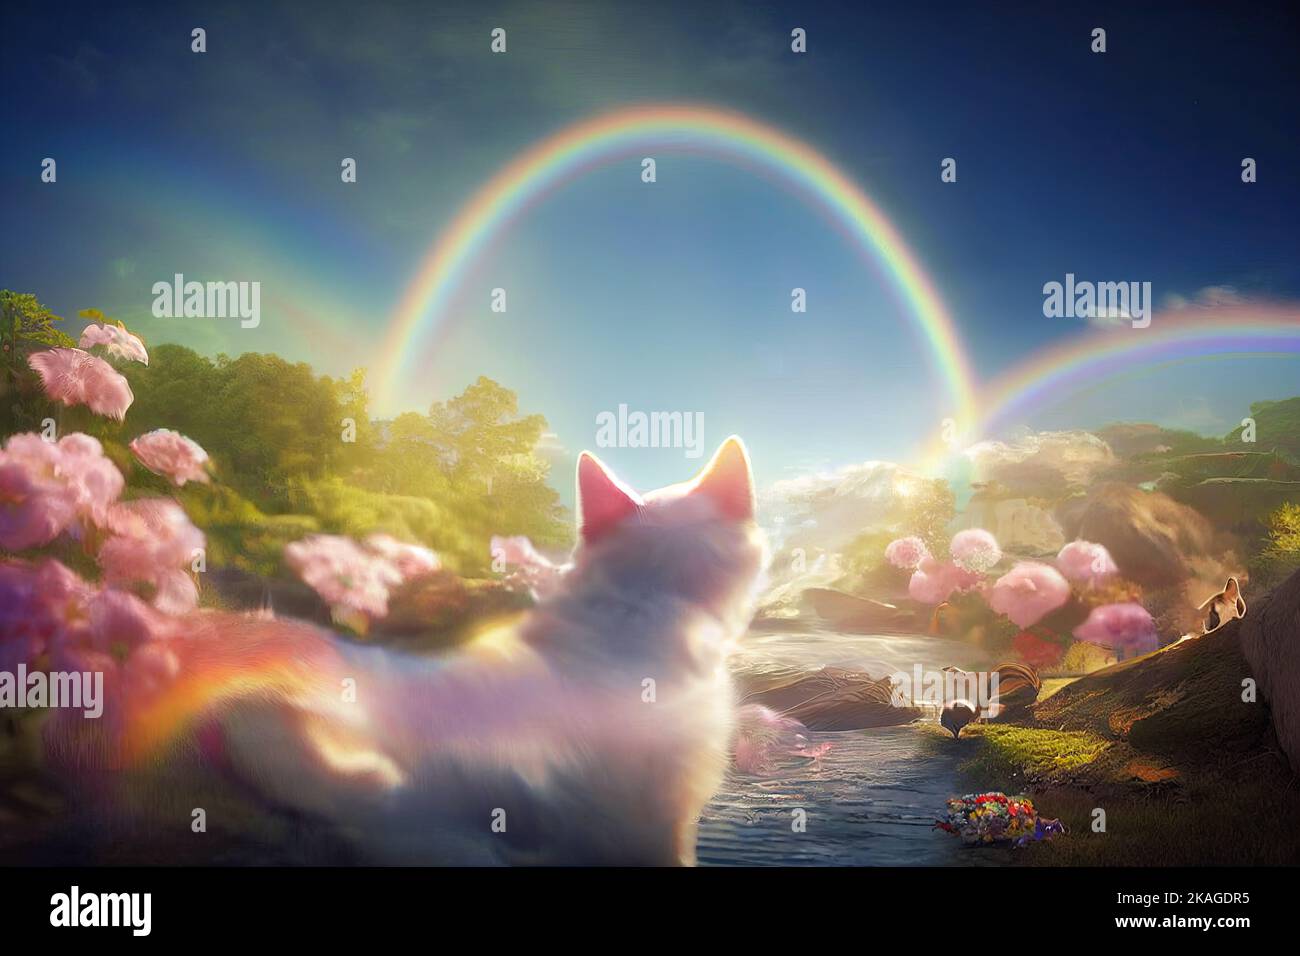 Heavenly paradise of dogs and cats. Happy pets running and playing funny in a beautiful fairy garden with rainbow bridge, ethereal clouds, and nice Stock Photo